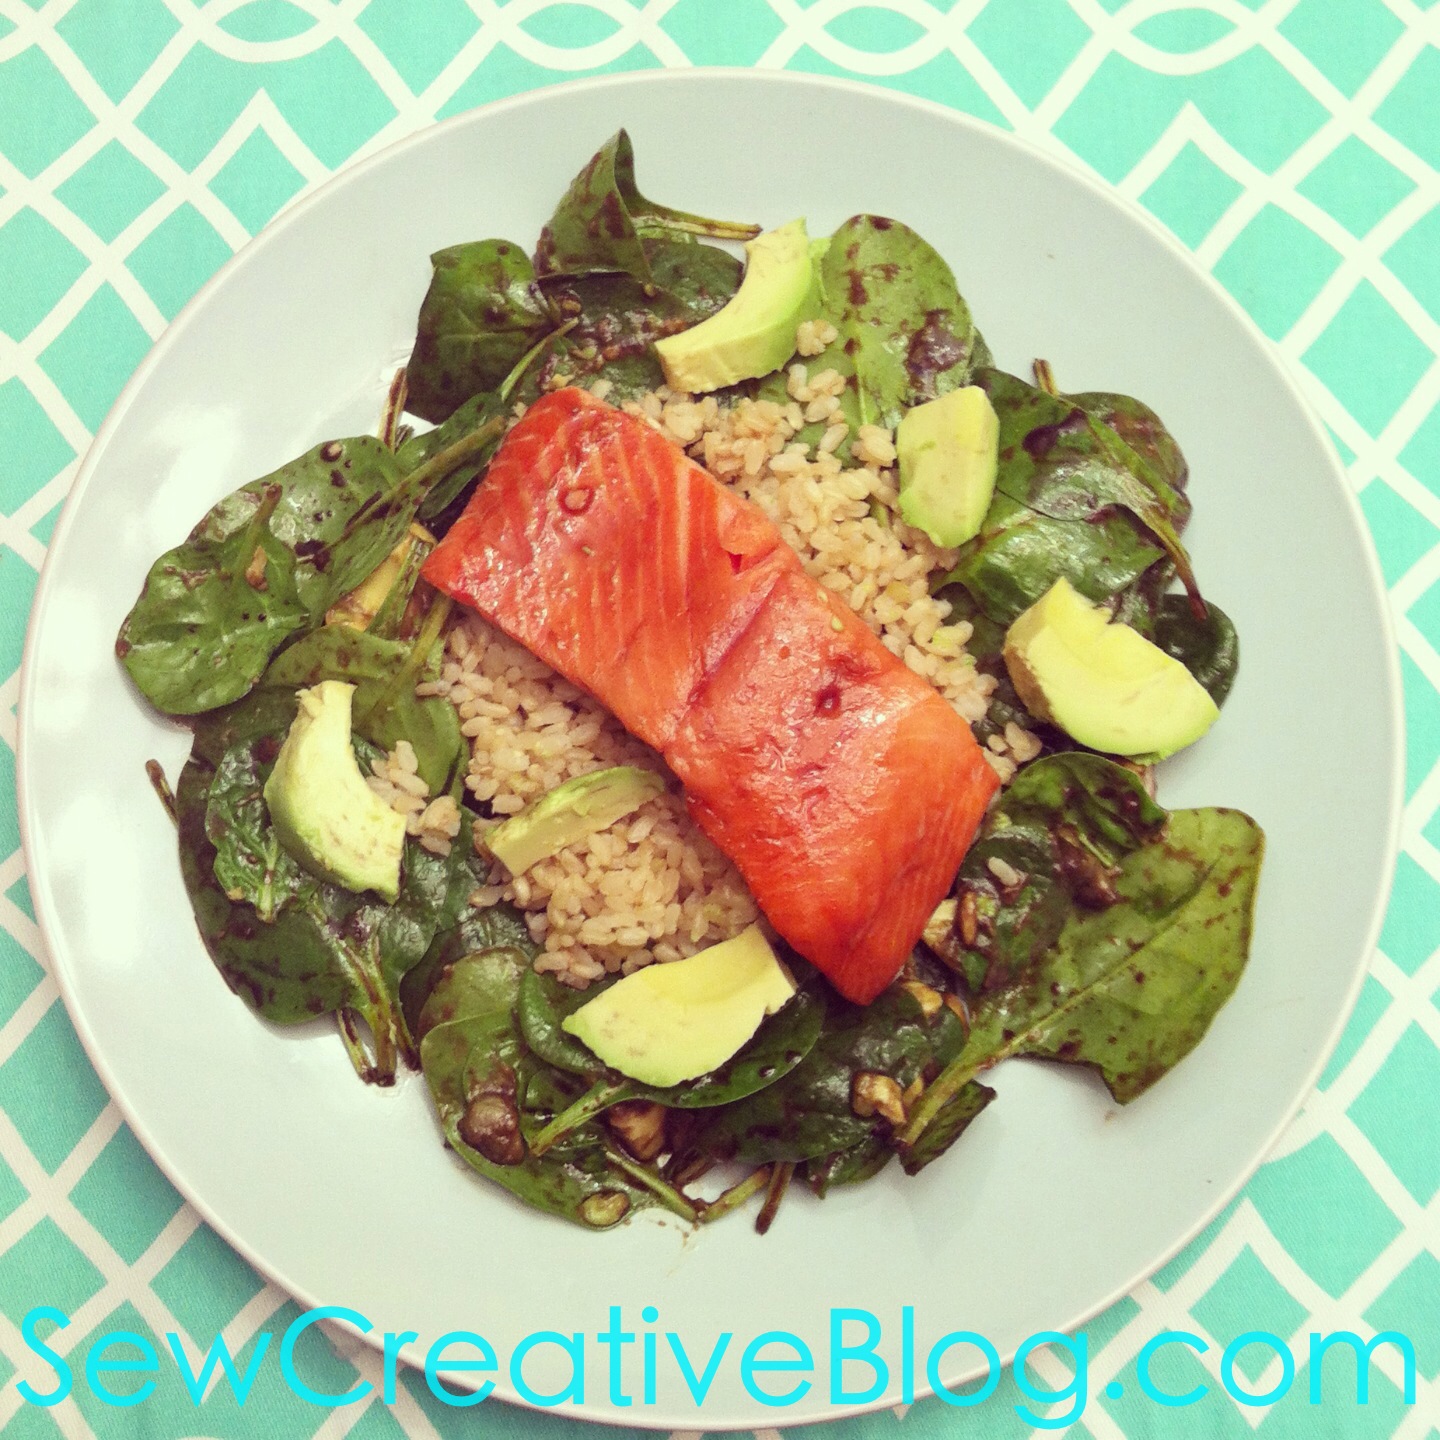 Salmon Spinach and Avocado Salad Recipe with Brown Rice or Quinoa from Sew Creative Blog